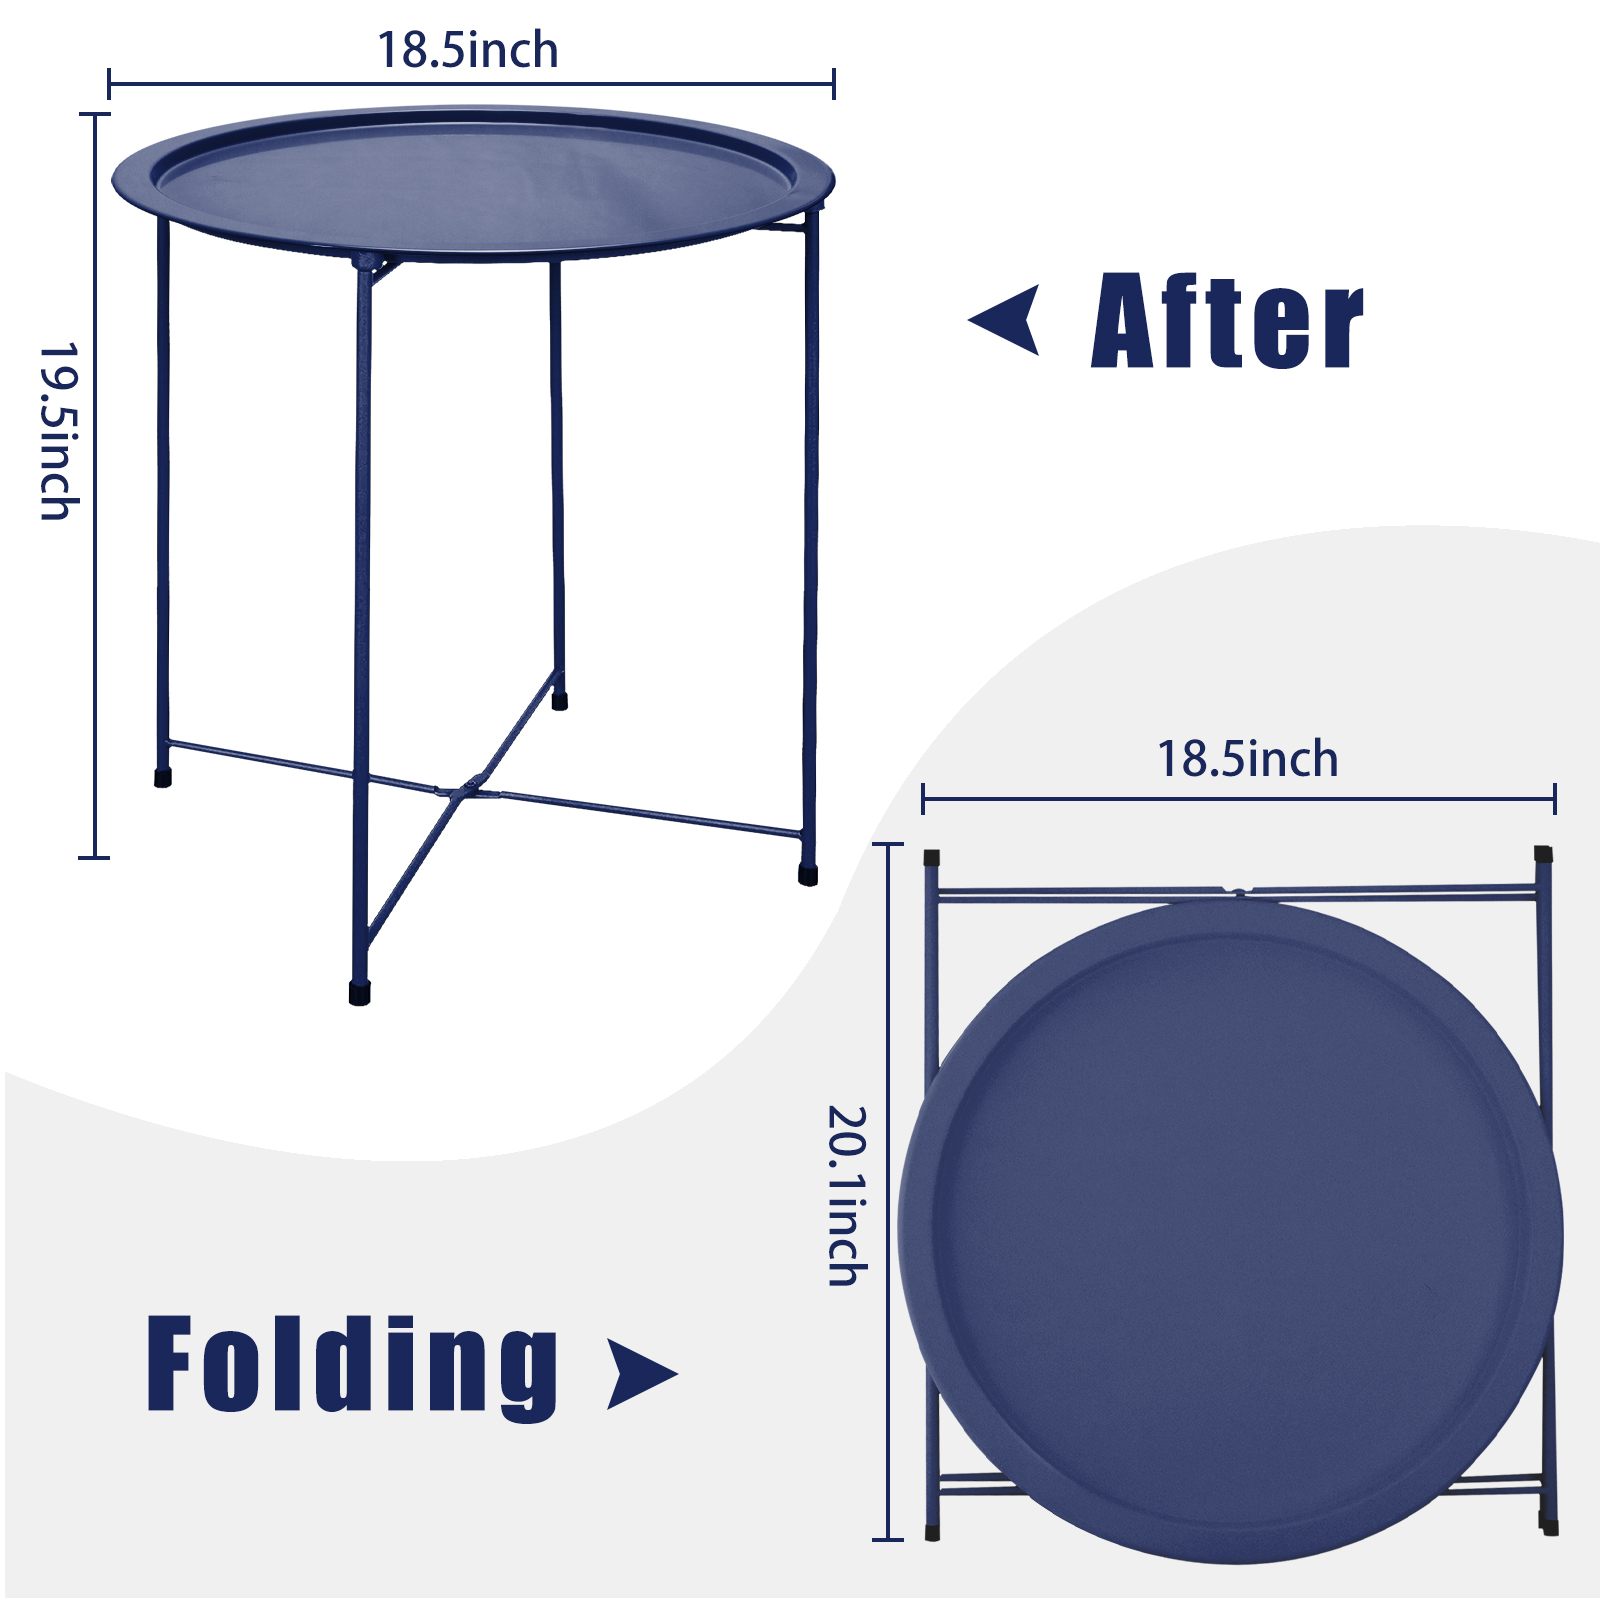 Folding Tray Metal Side Table Round End Table,Dark Blue Sofa Small Accent Fold-able Table, Round End Table Tray, Next to Sofa Table, Snack Table for Living Room and Bed Room - image 2 of 6